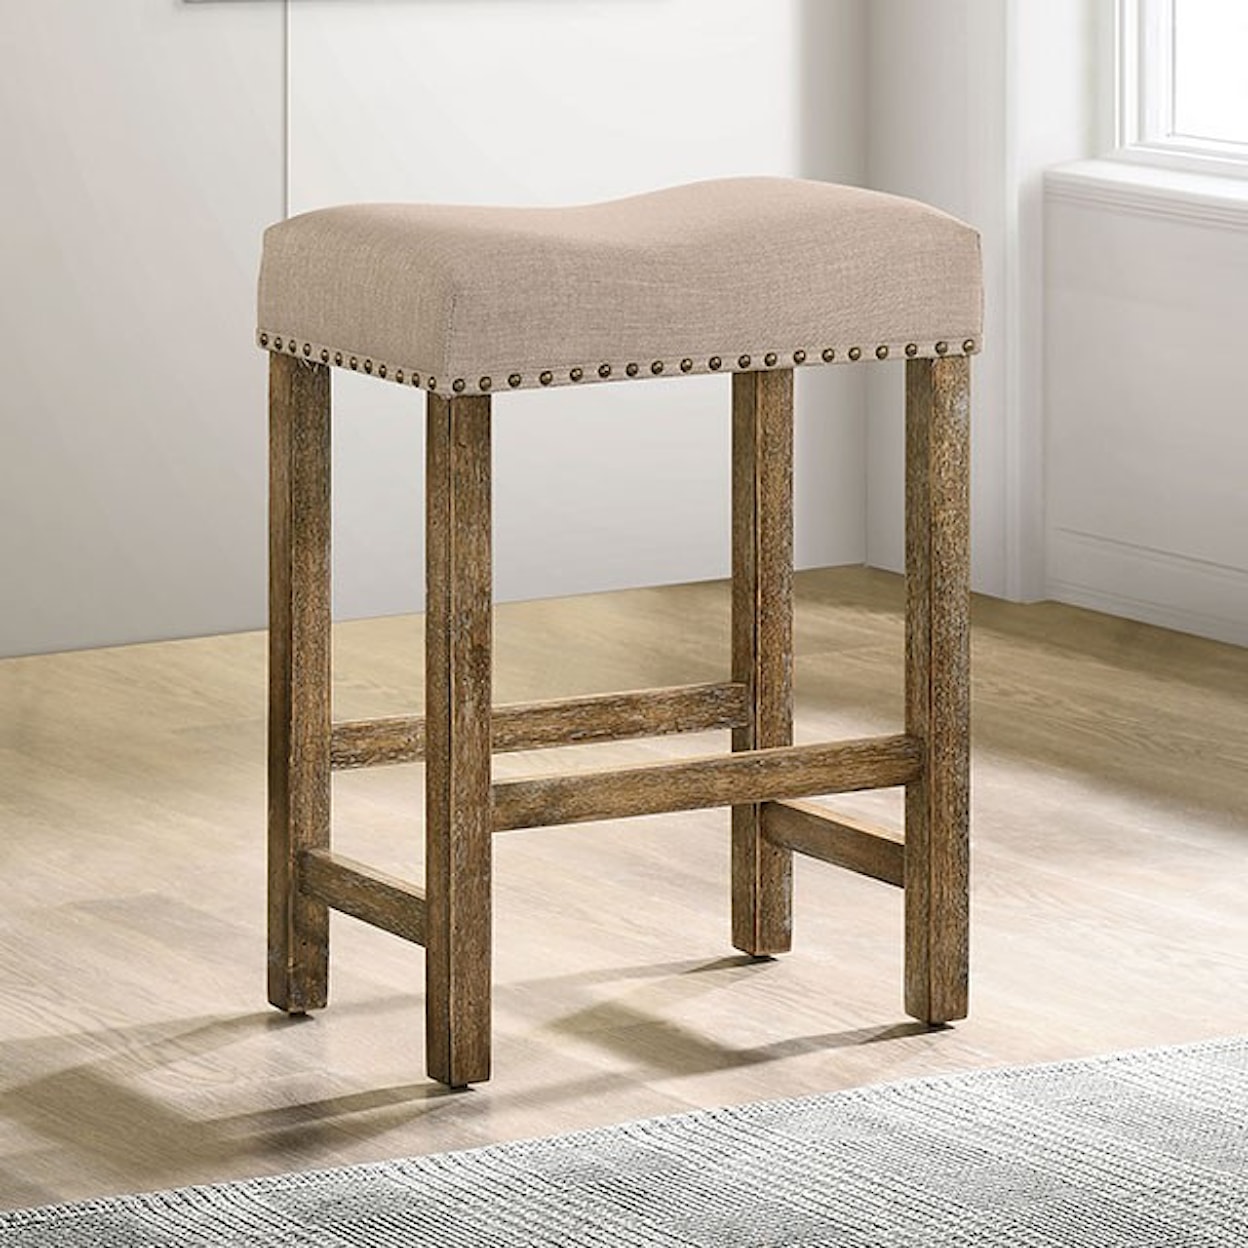 Furniture of America Plankinton Two-Piece Counter Height Stool Set